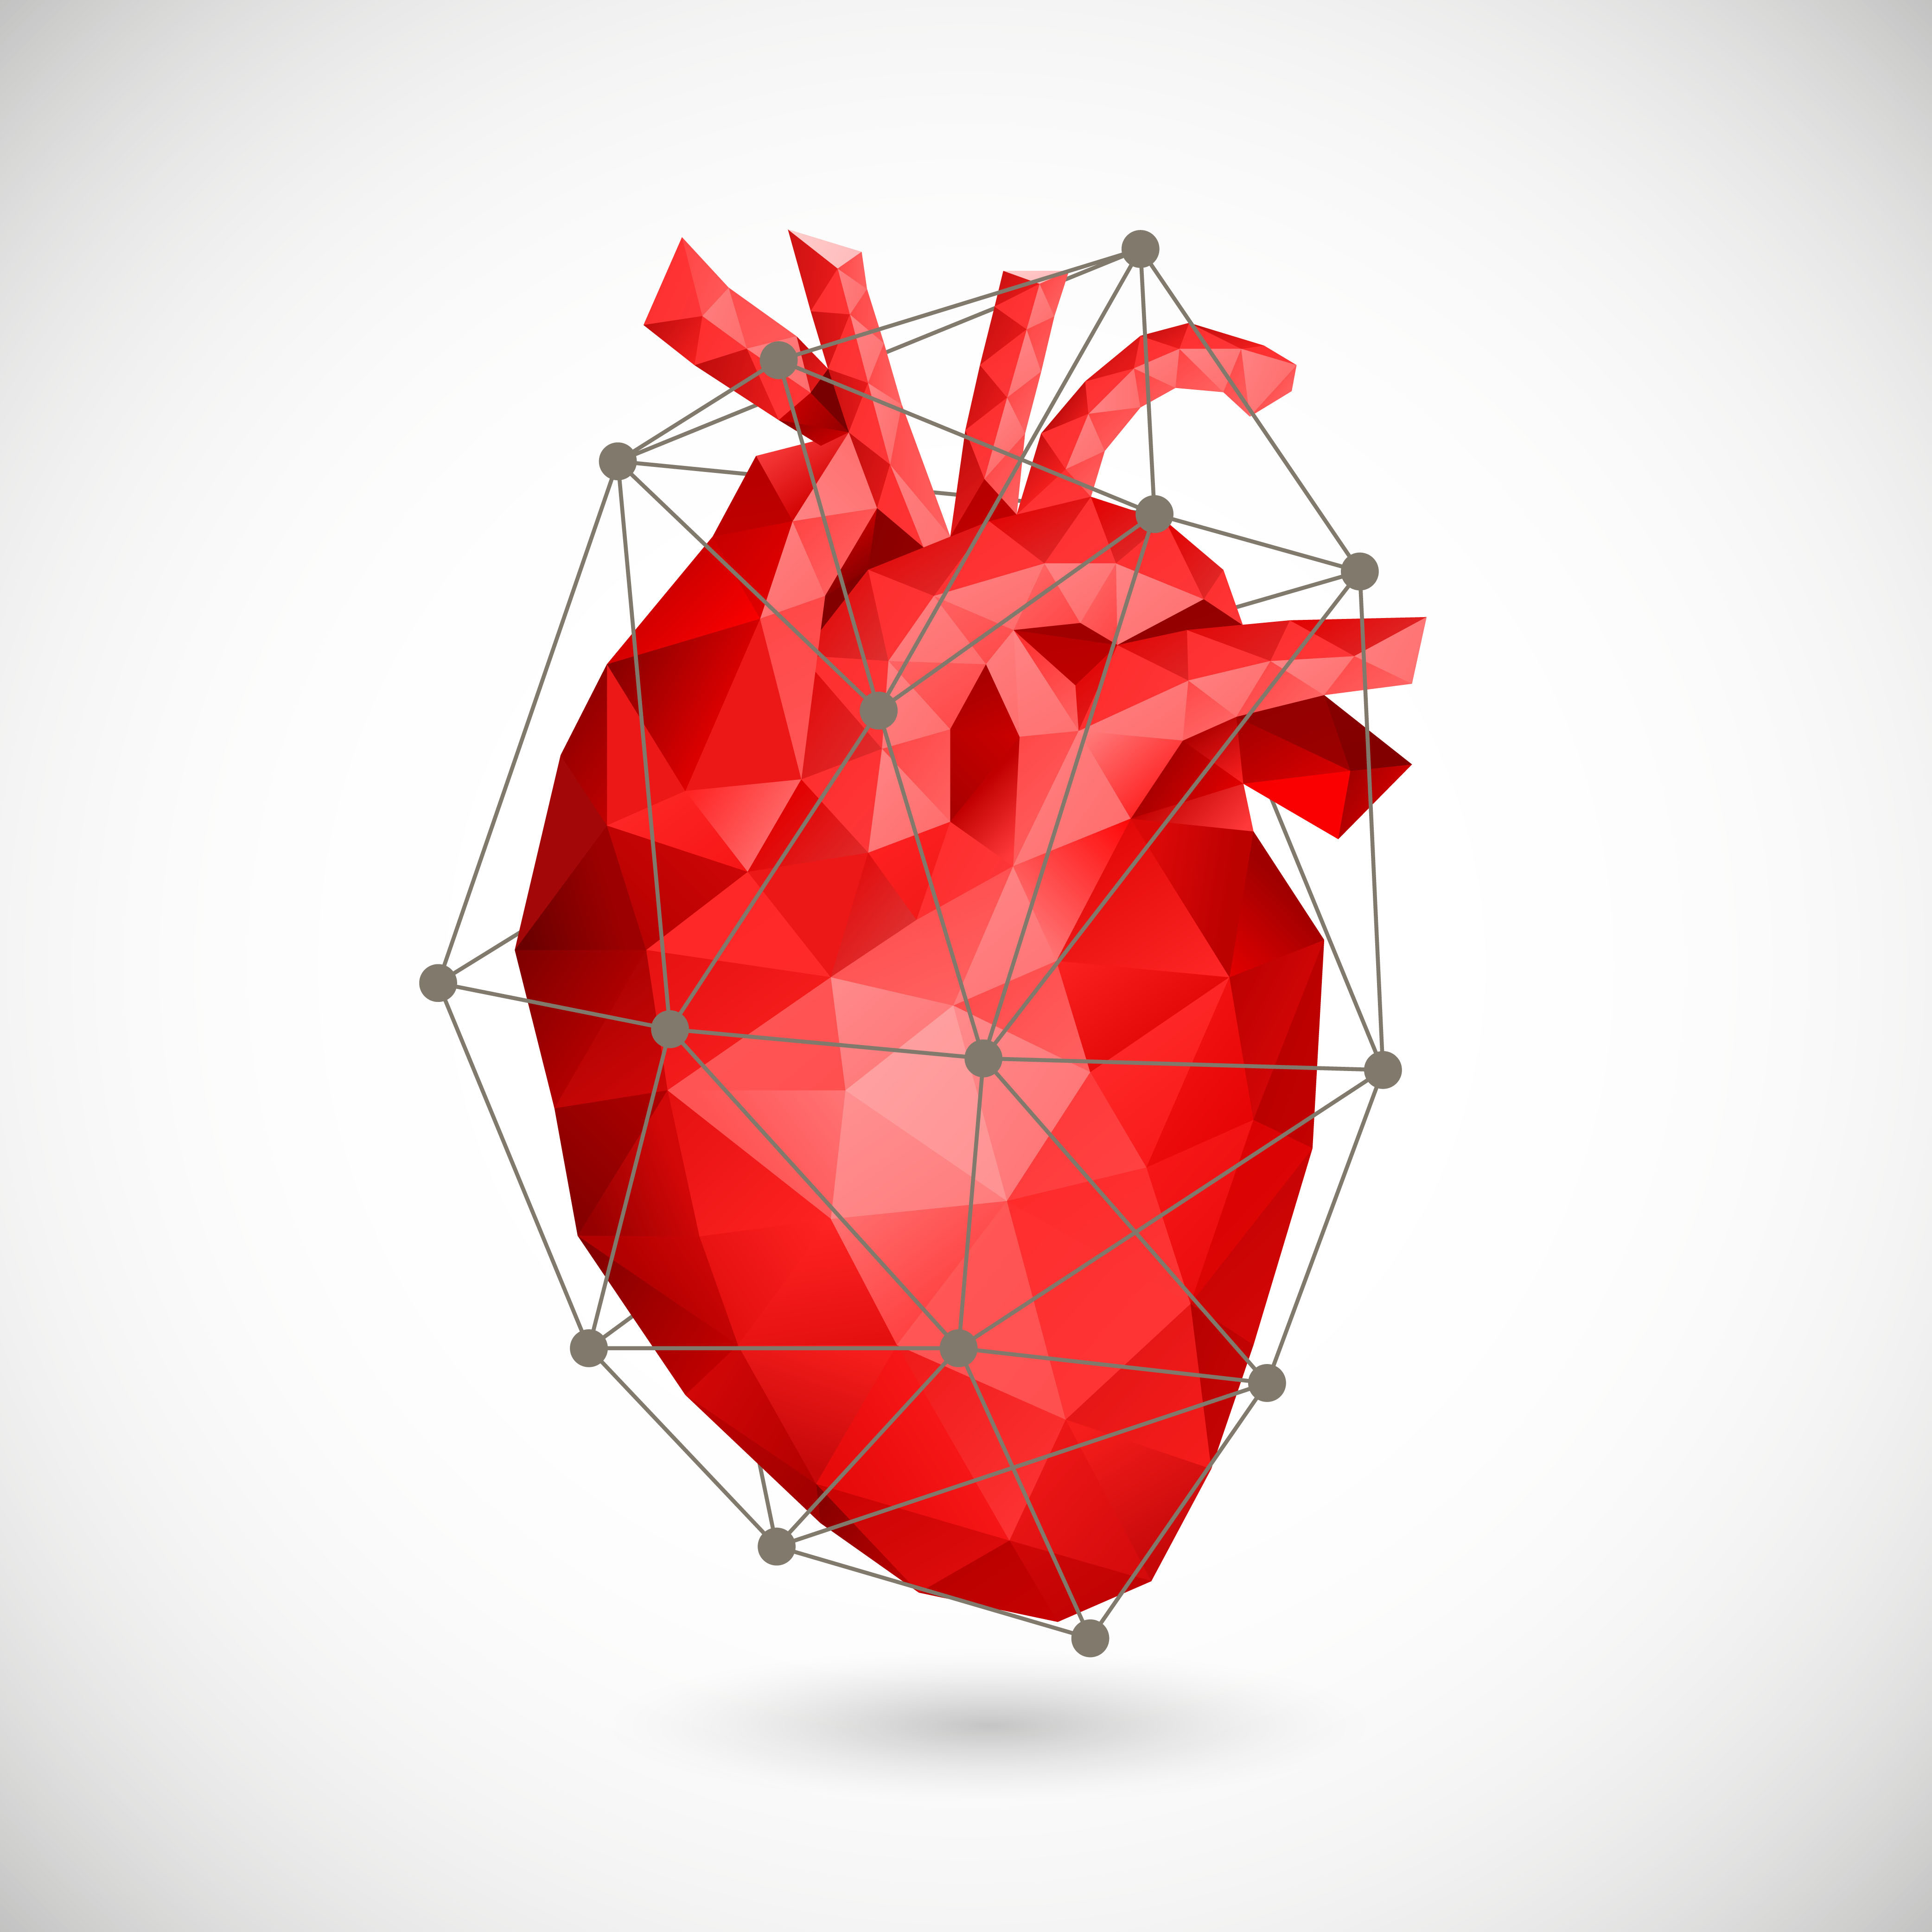 Low poly heart. Vector illustration